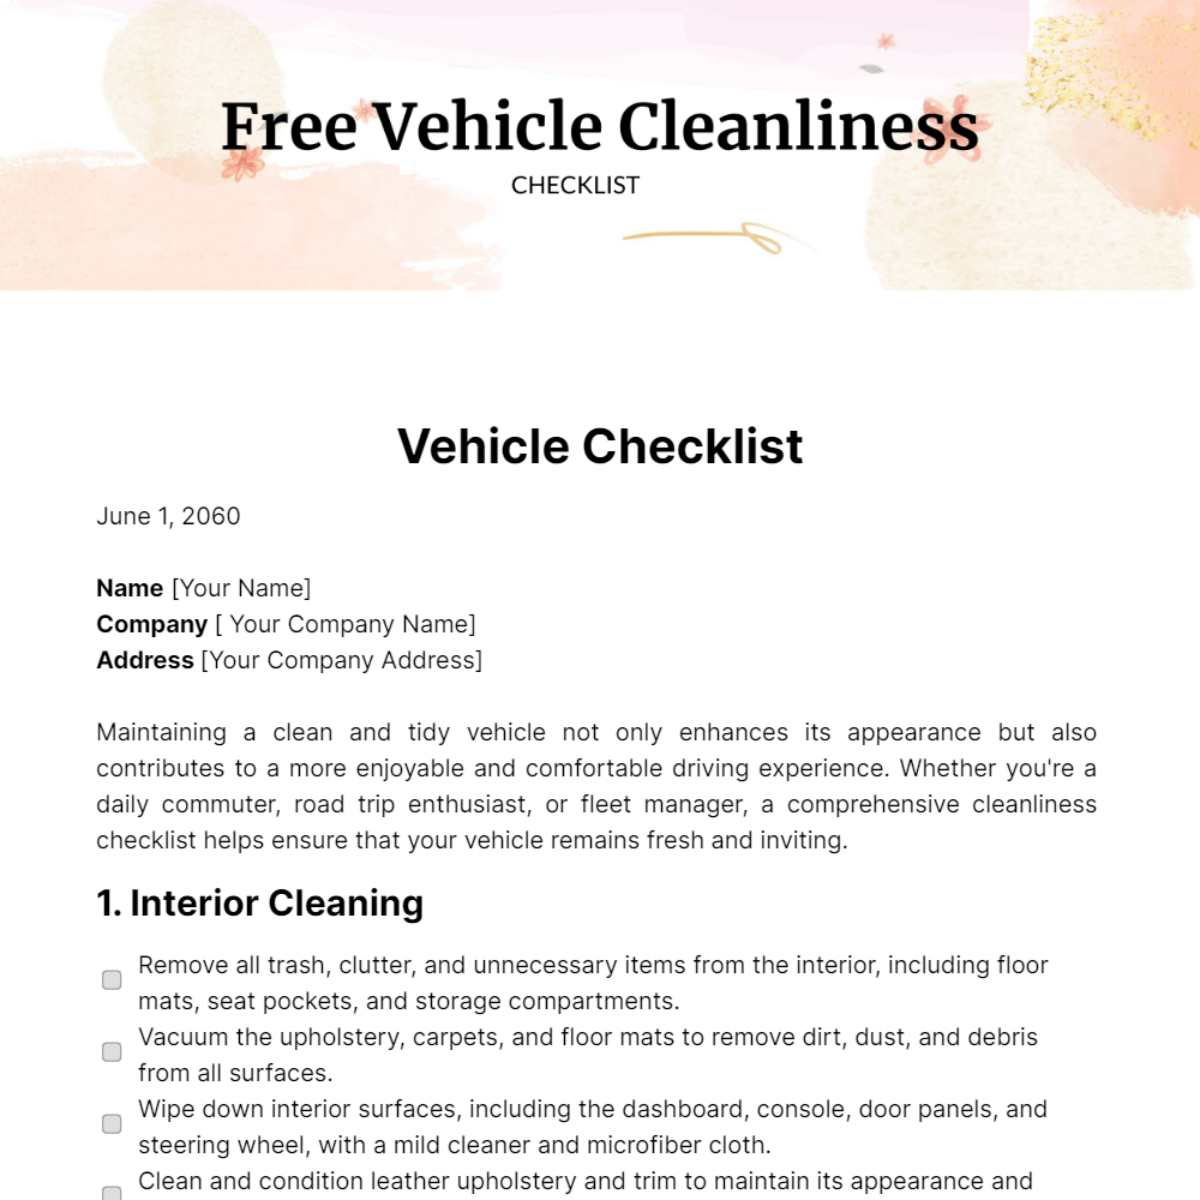 Free Vehicle Cleanliness Checklist Template